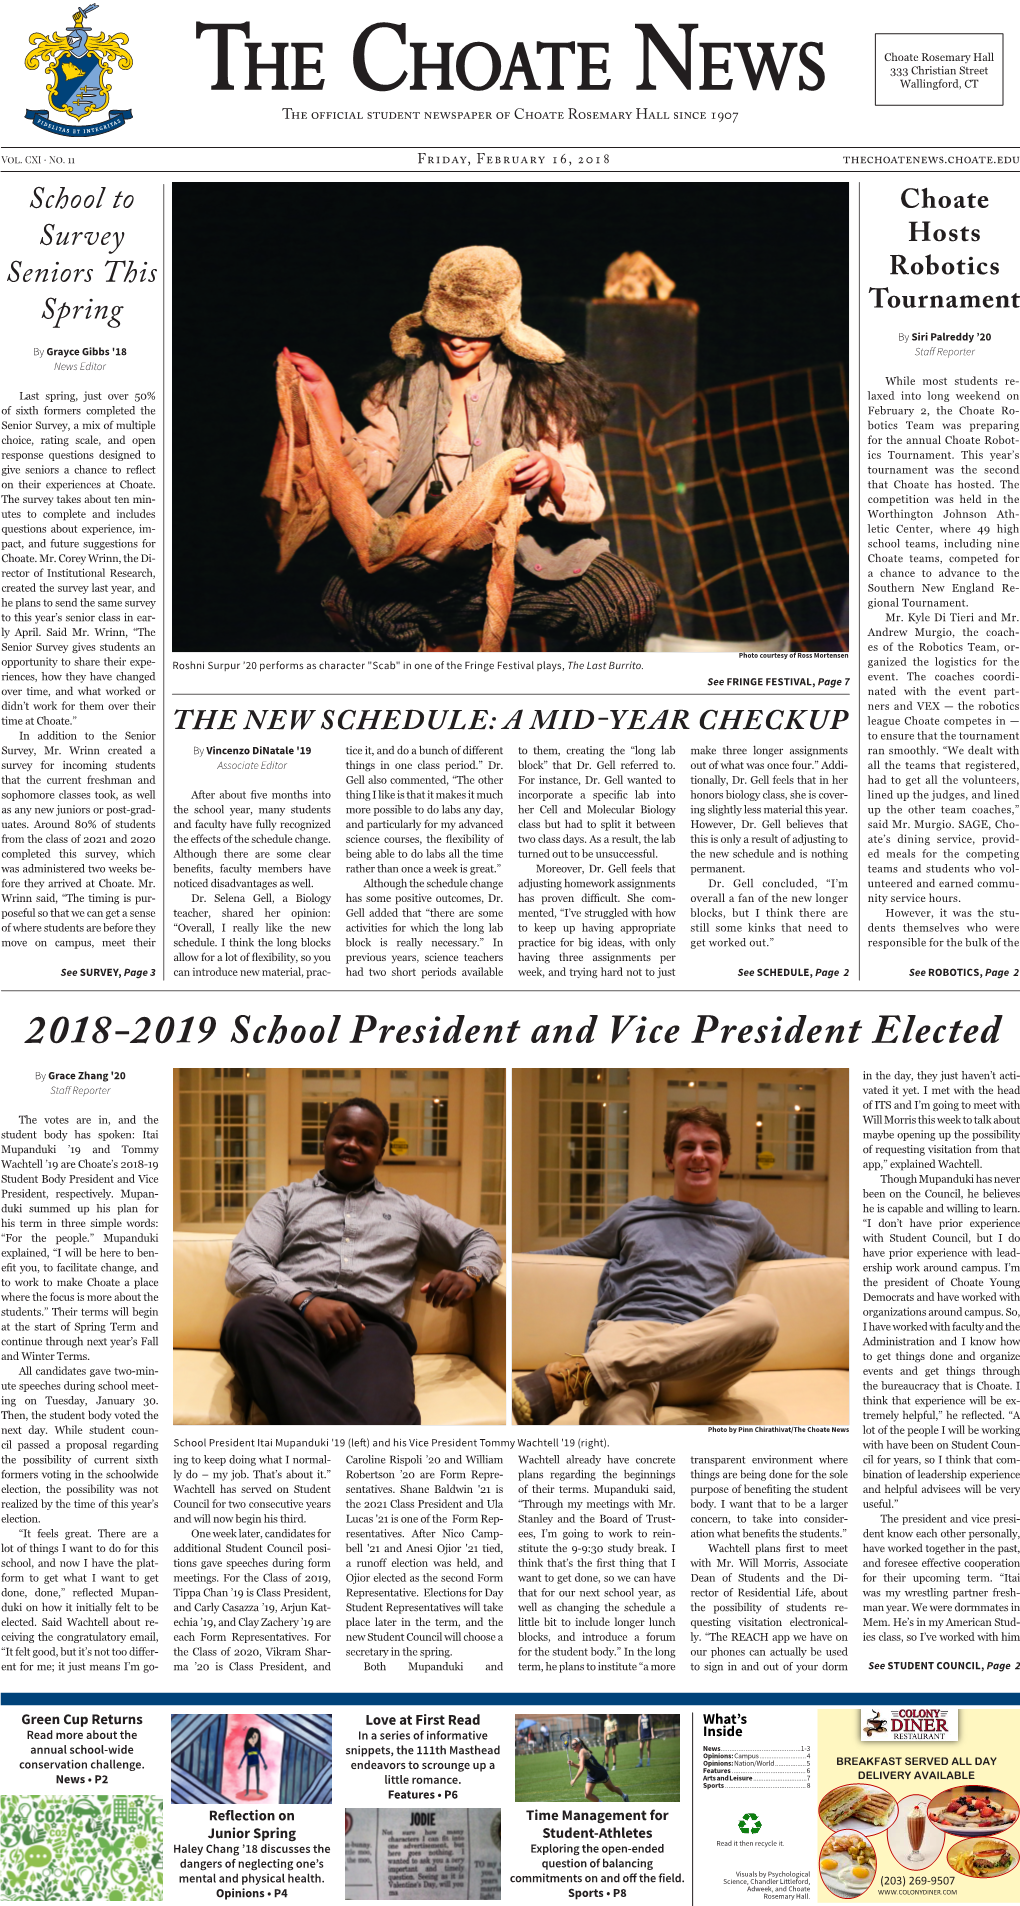 2018-2019 School President and Vice President Elected by Grace Zhang '20 in the Day, They Just Haven’T Acti- Staf Reporter Vated It Yet